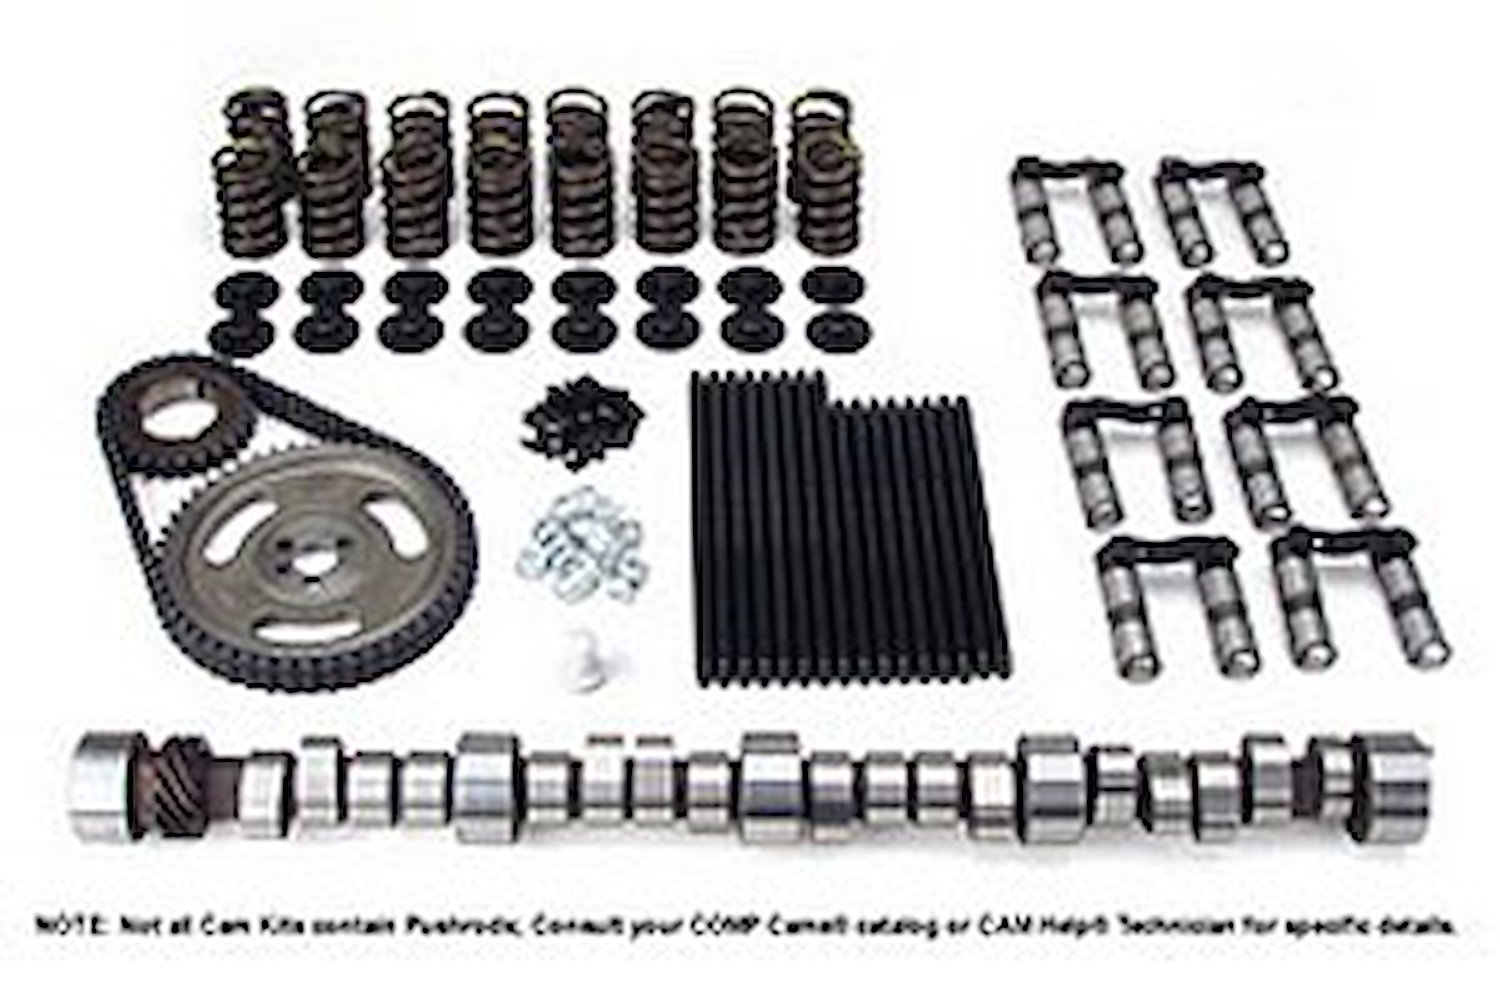 Magnum Hydraulic Roller Camshaft Complete Kit Chevy Big Block 396-454 Retro Fit Lift: .566"/.566"